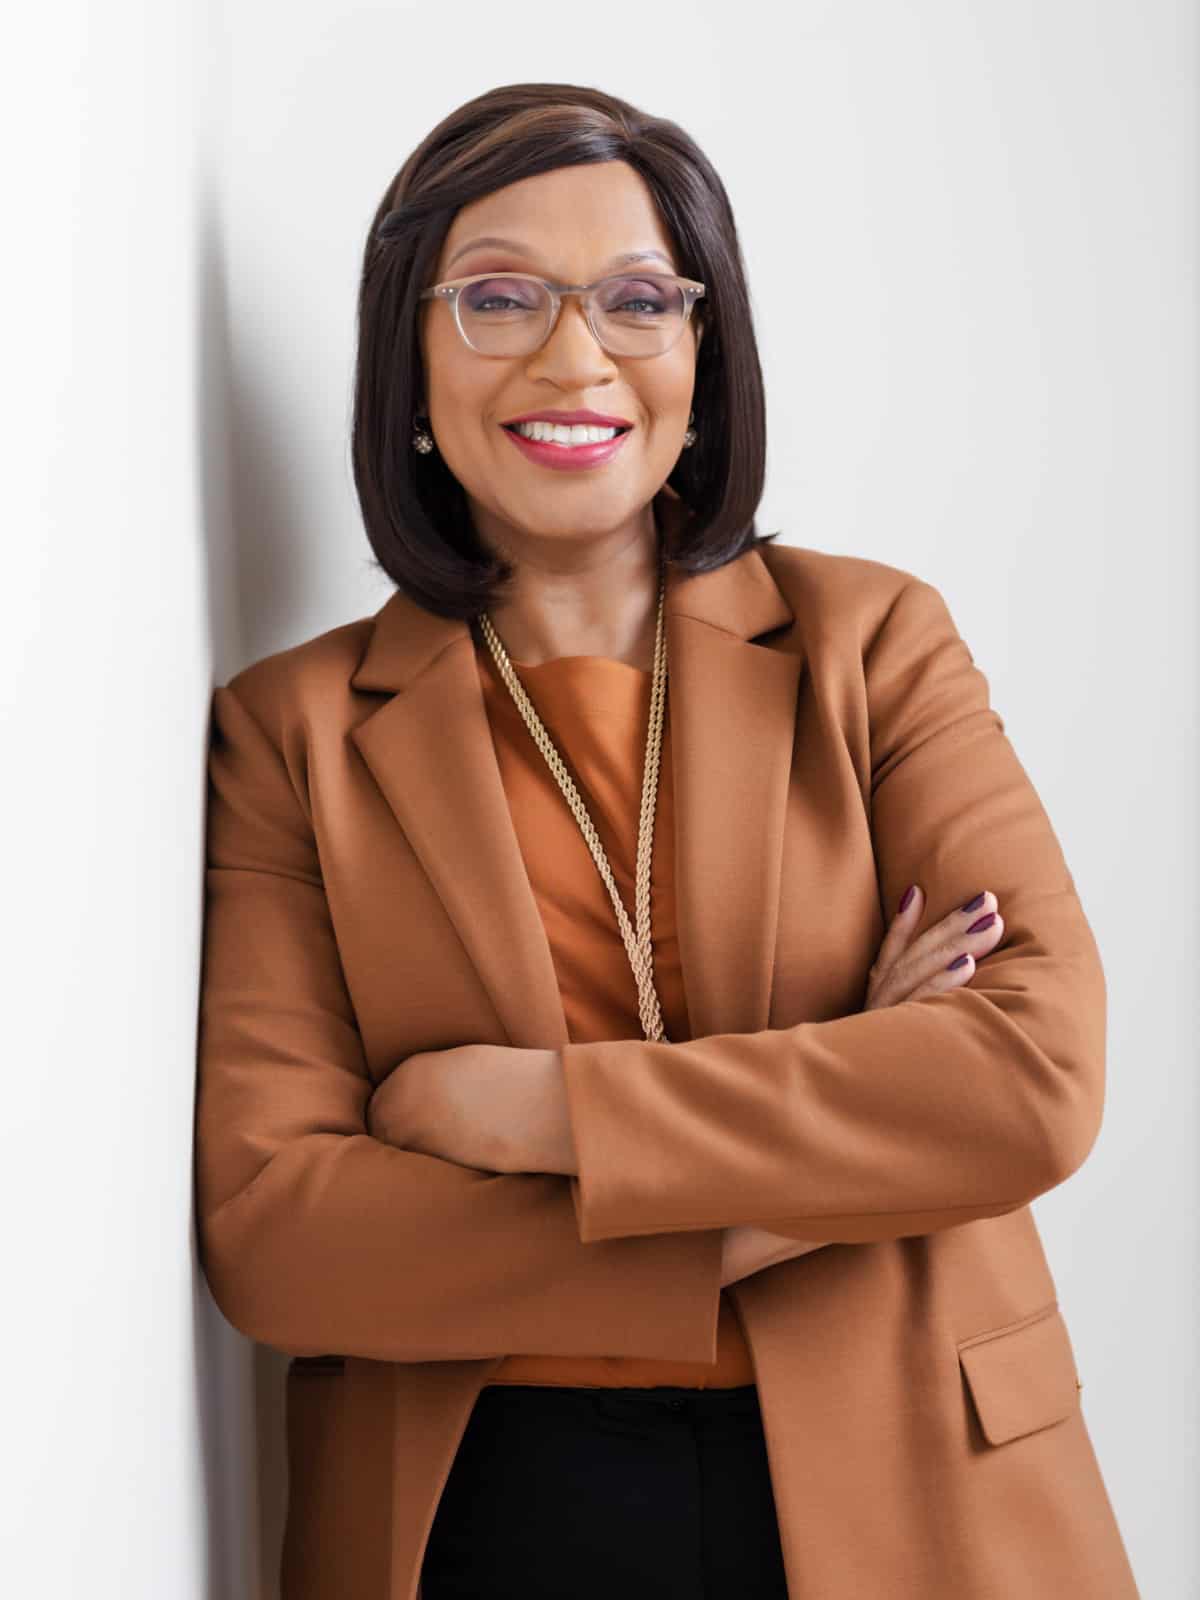 Cheryl Kern, Vice President of Diversity, Equity, and Inclusion